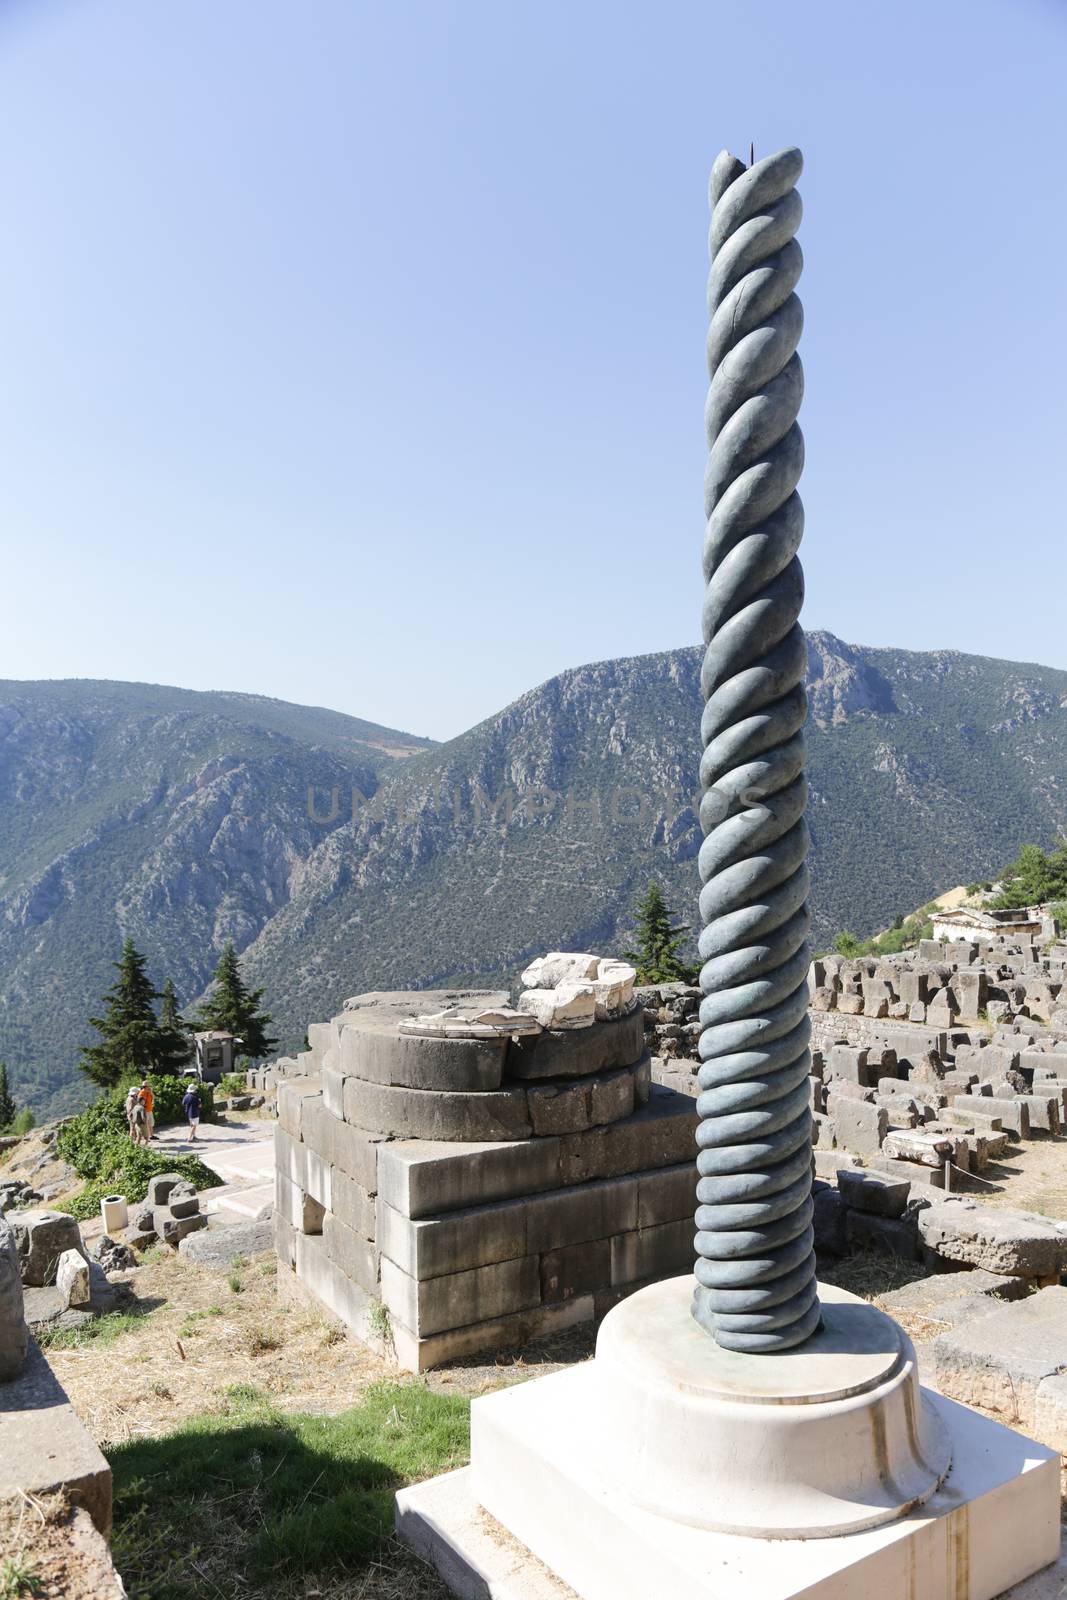 The ruins in Delphi, an archaeological site in Greece at the Mount Parnassus. Delphi is famous by the oracle at the sanctuary dedicated to Apollo. UNESCO World heritage